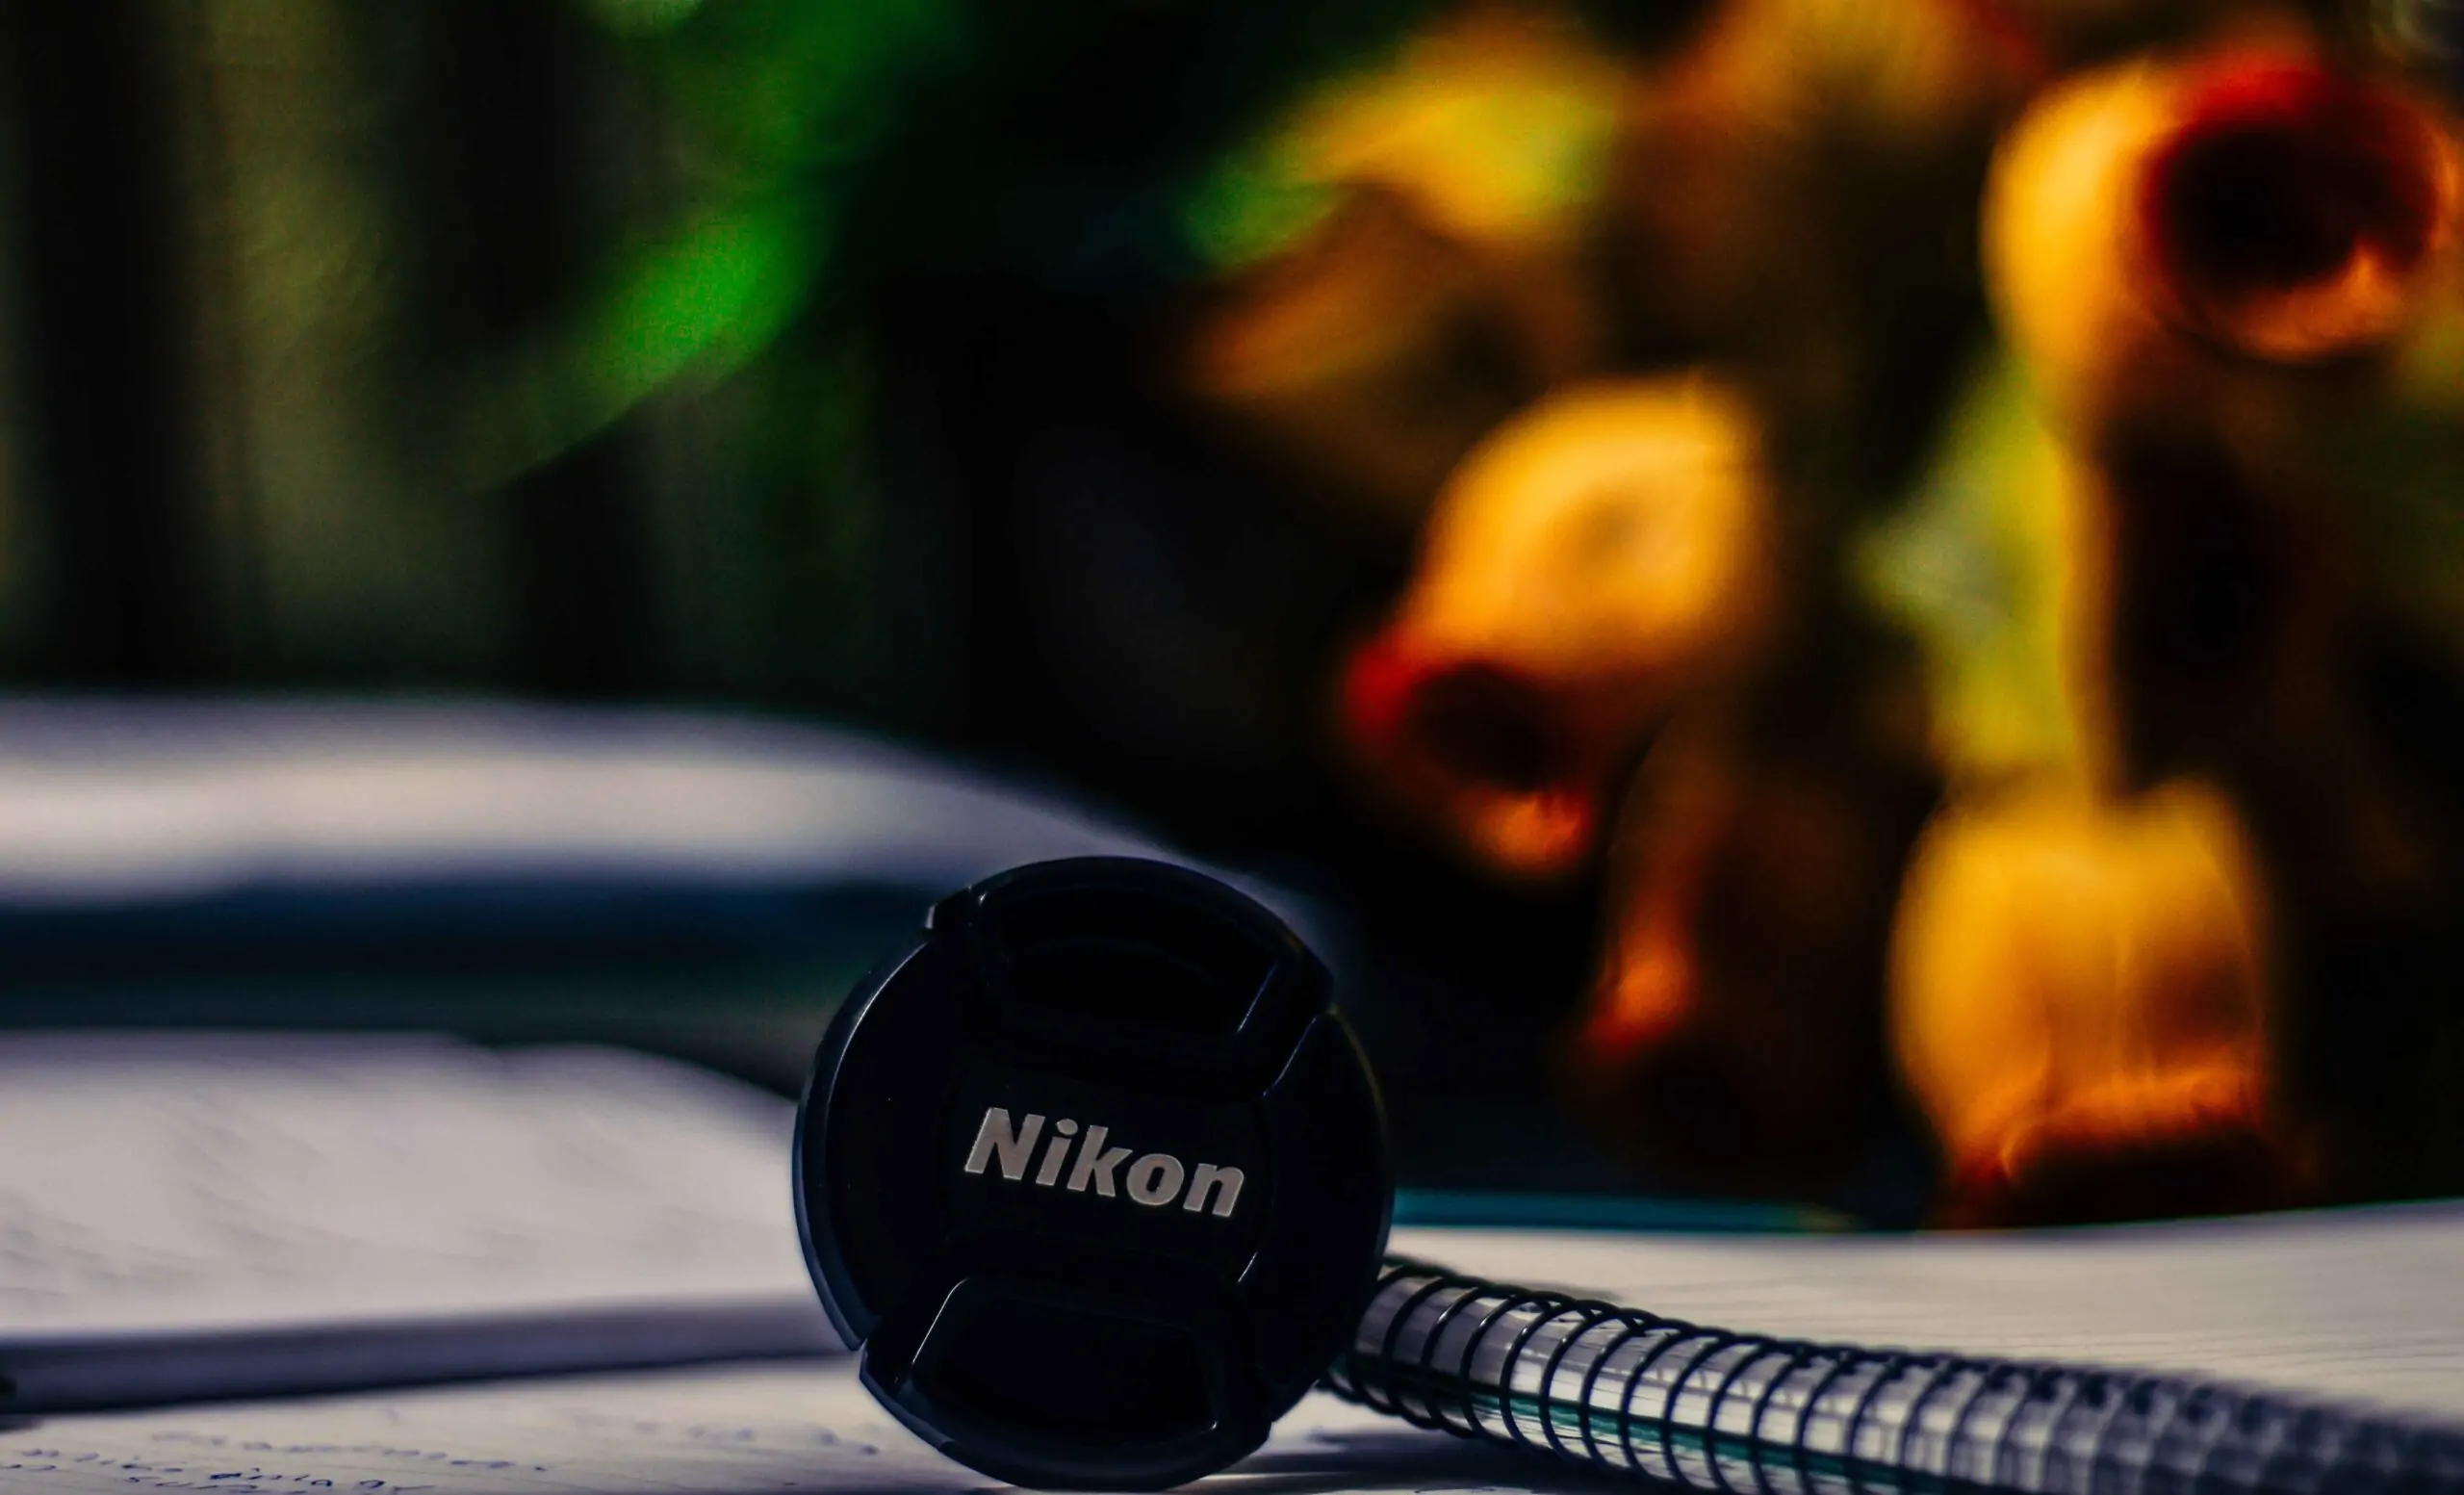 Get Back Into Photography with the Best Lenses for Nikon D7500